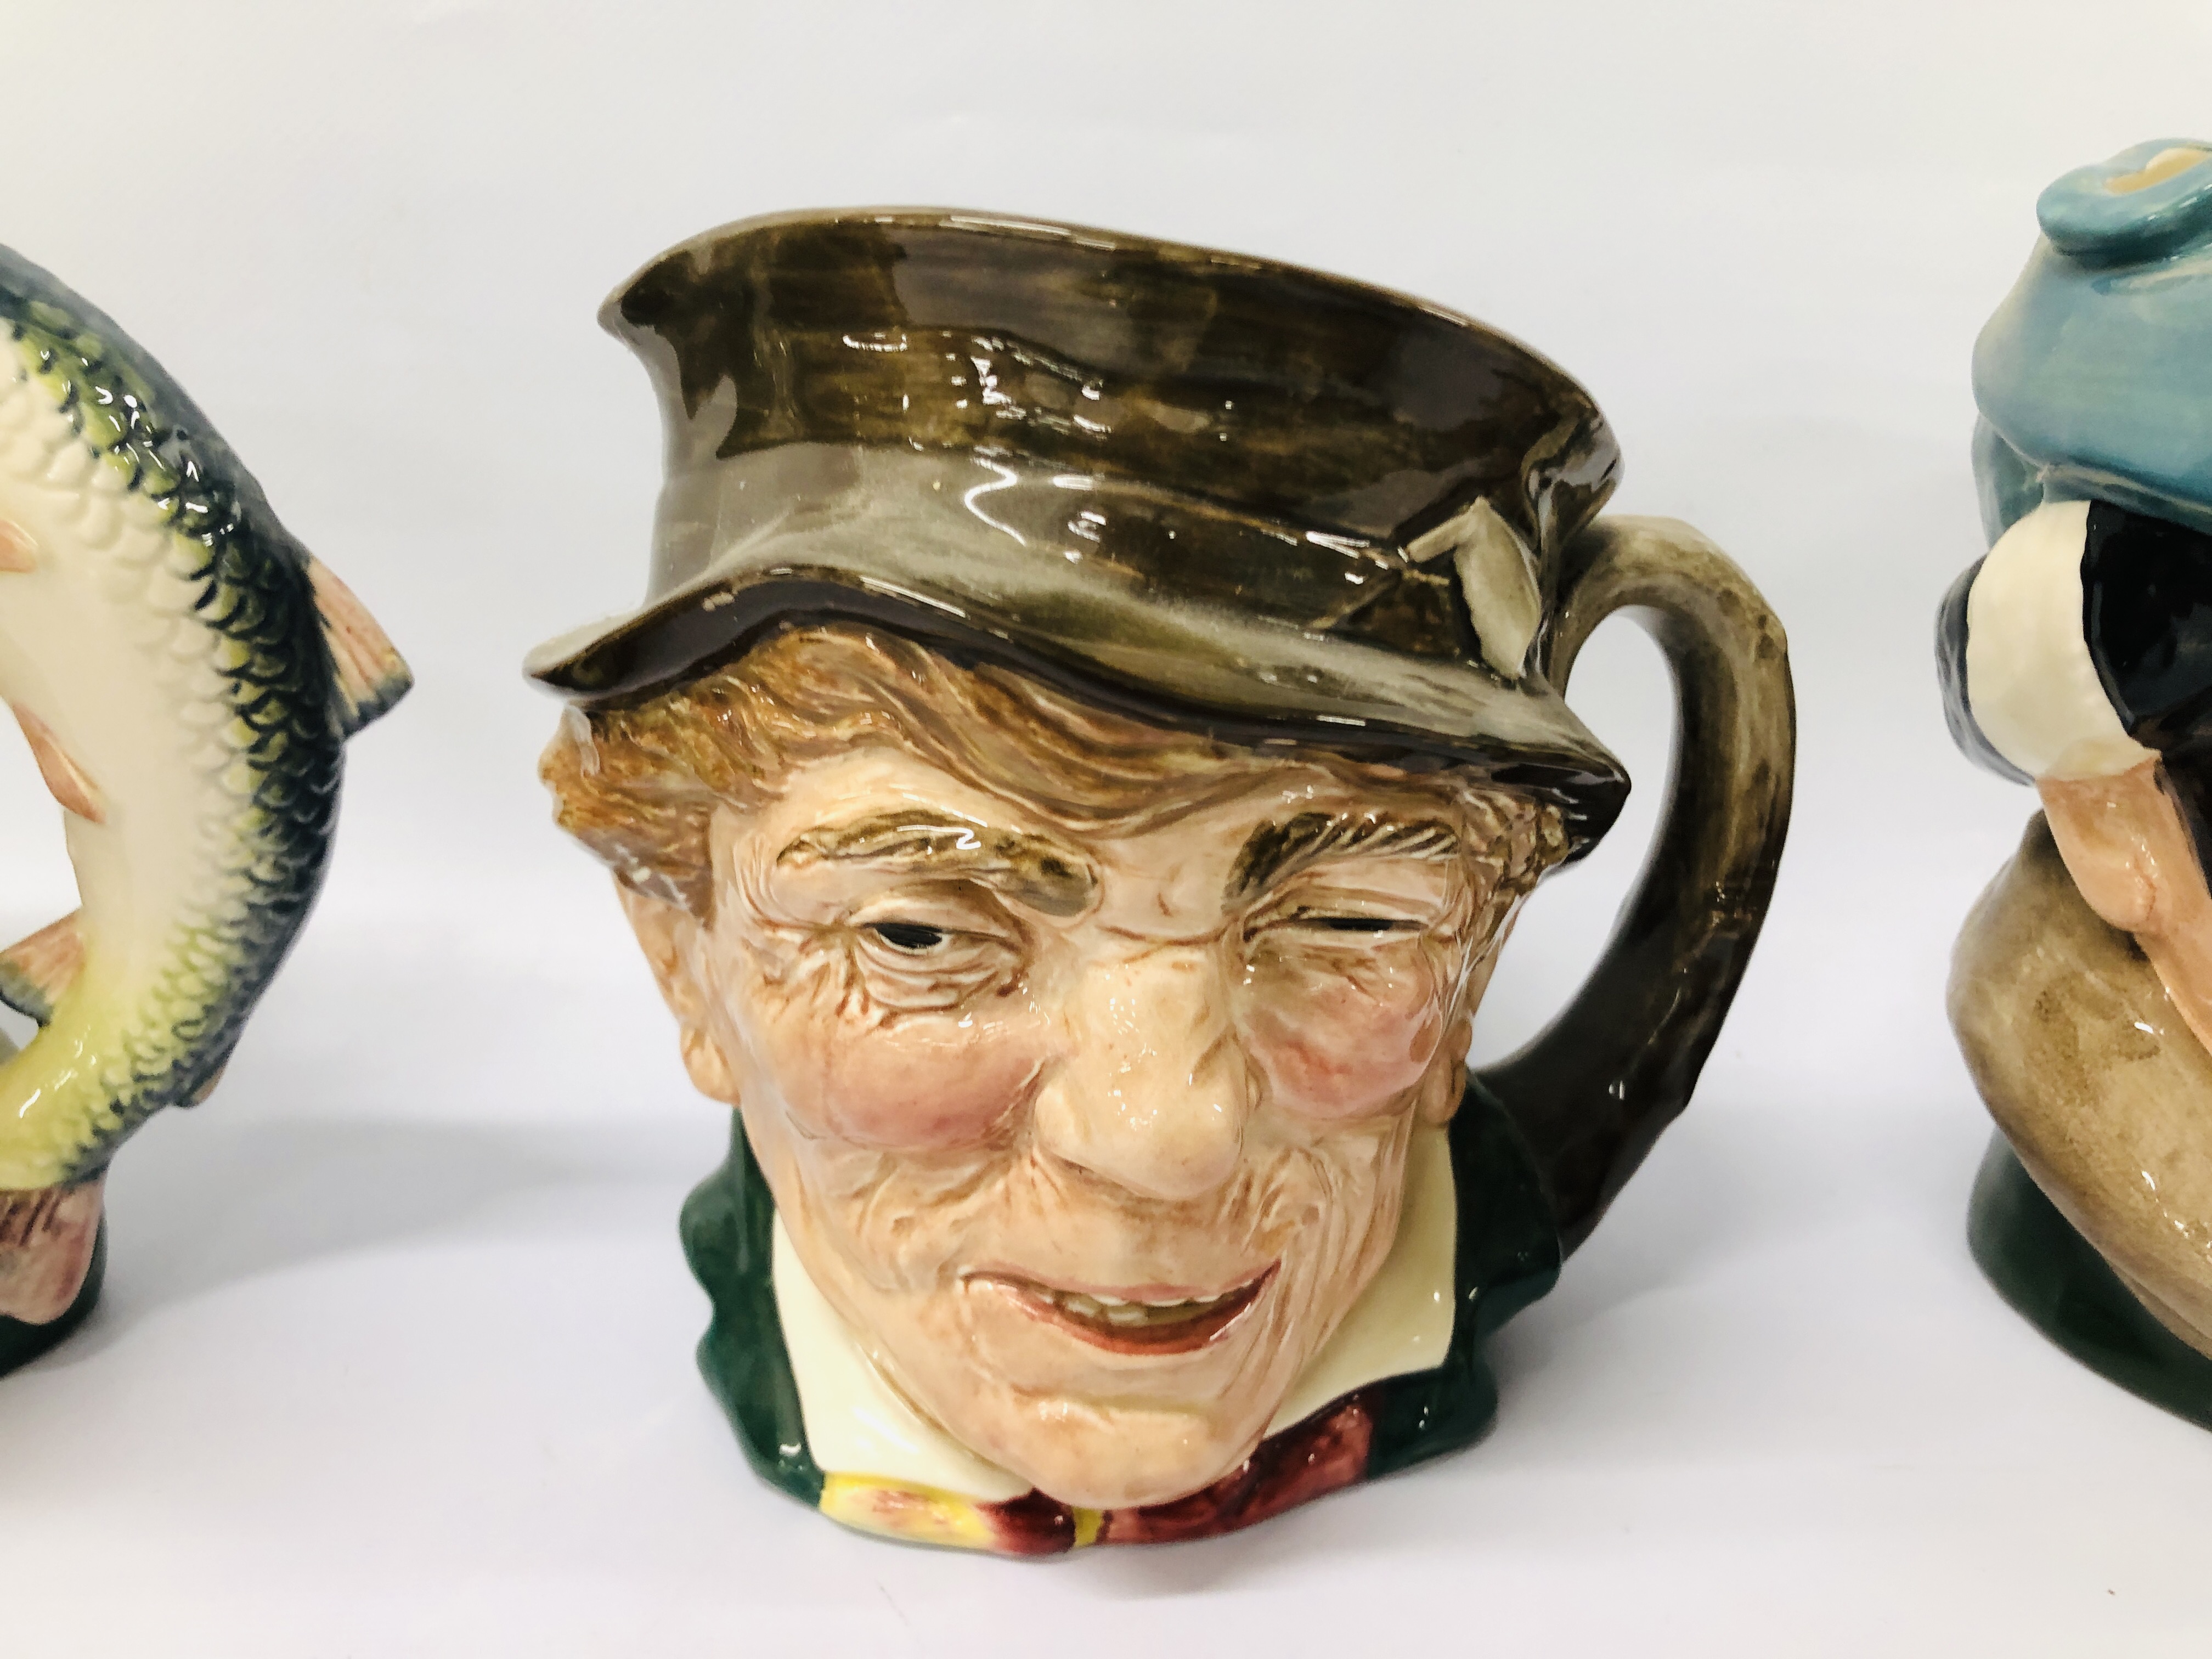 3 X ROYAL DOULTON CHARACTER JUGS TO INCLUDE "THE POACHER" - D 6429, THE FALCONER D 6533, - Image 3 of 8